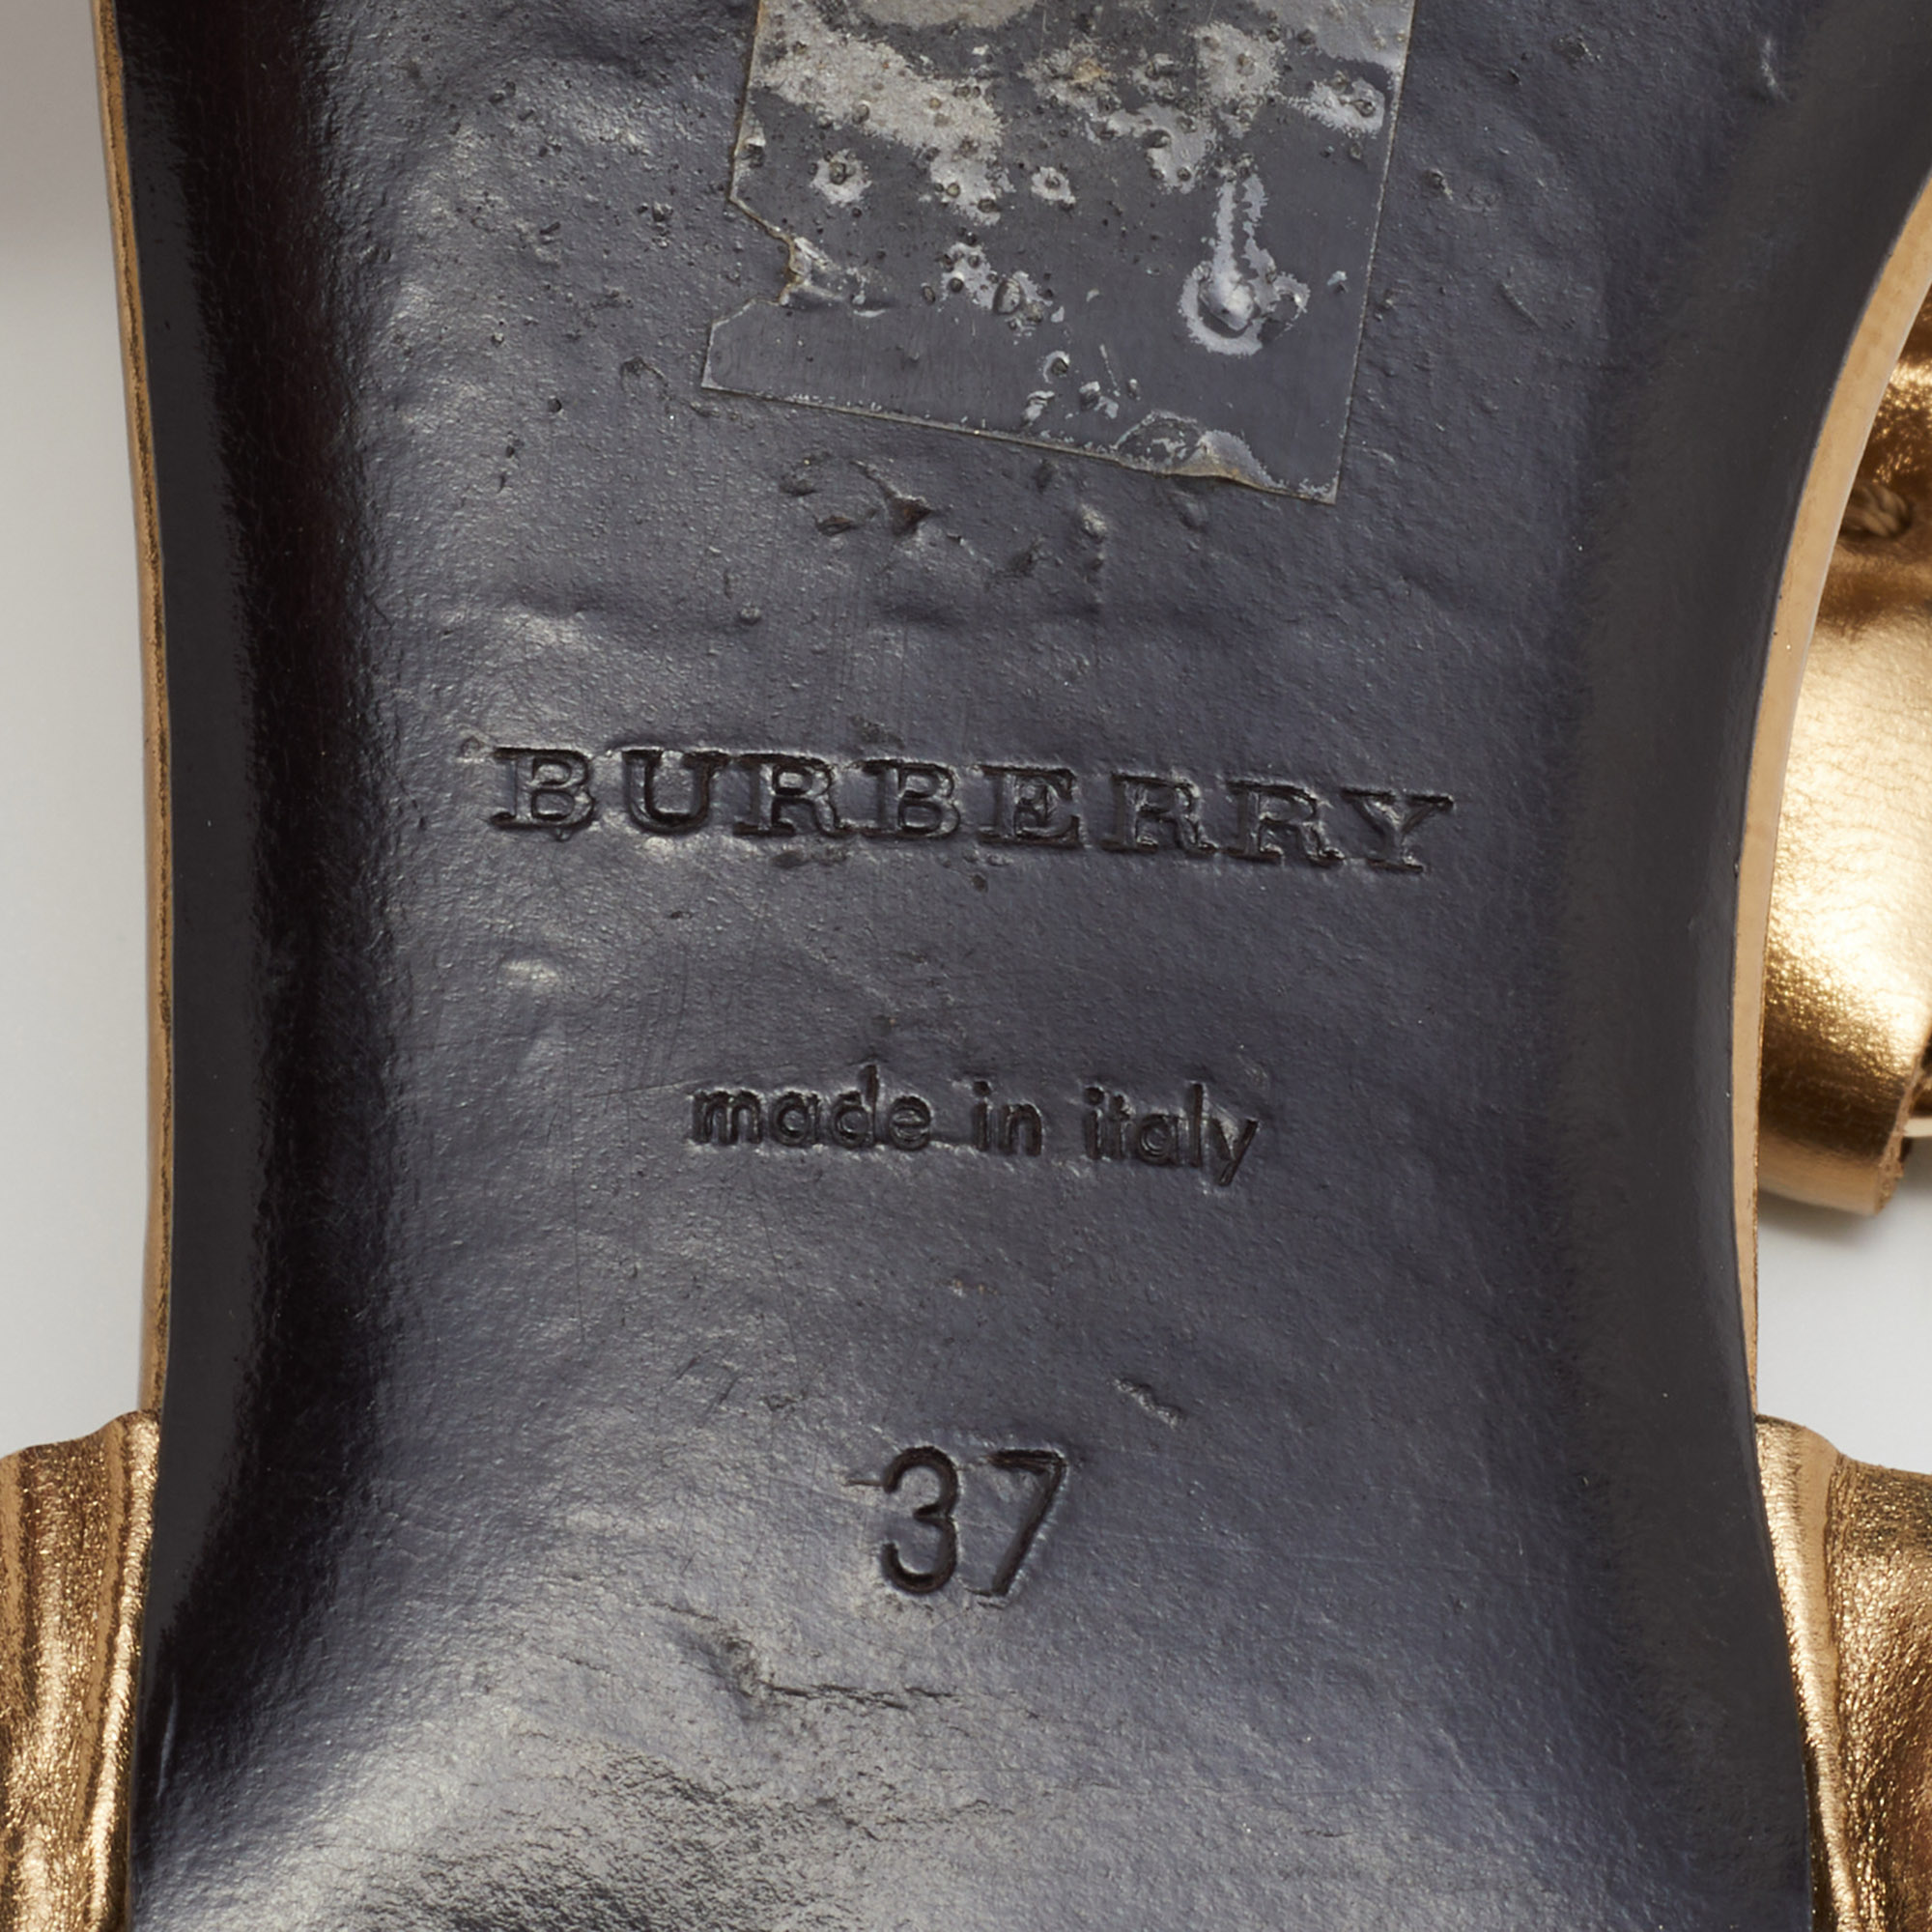 Burberry Gold Leather T Strap Flat Sandals Size 37